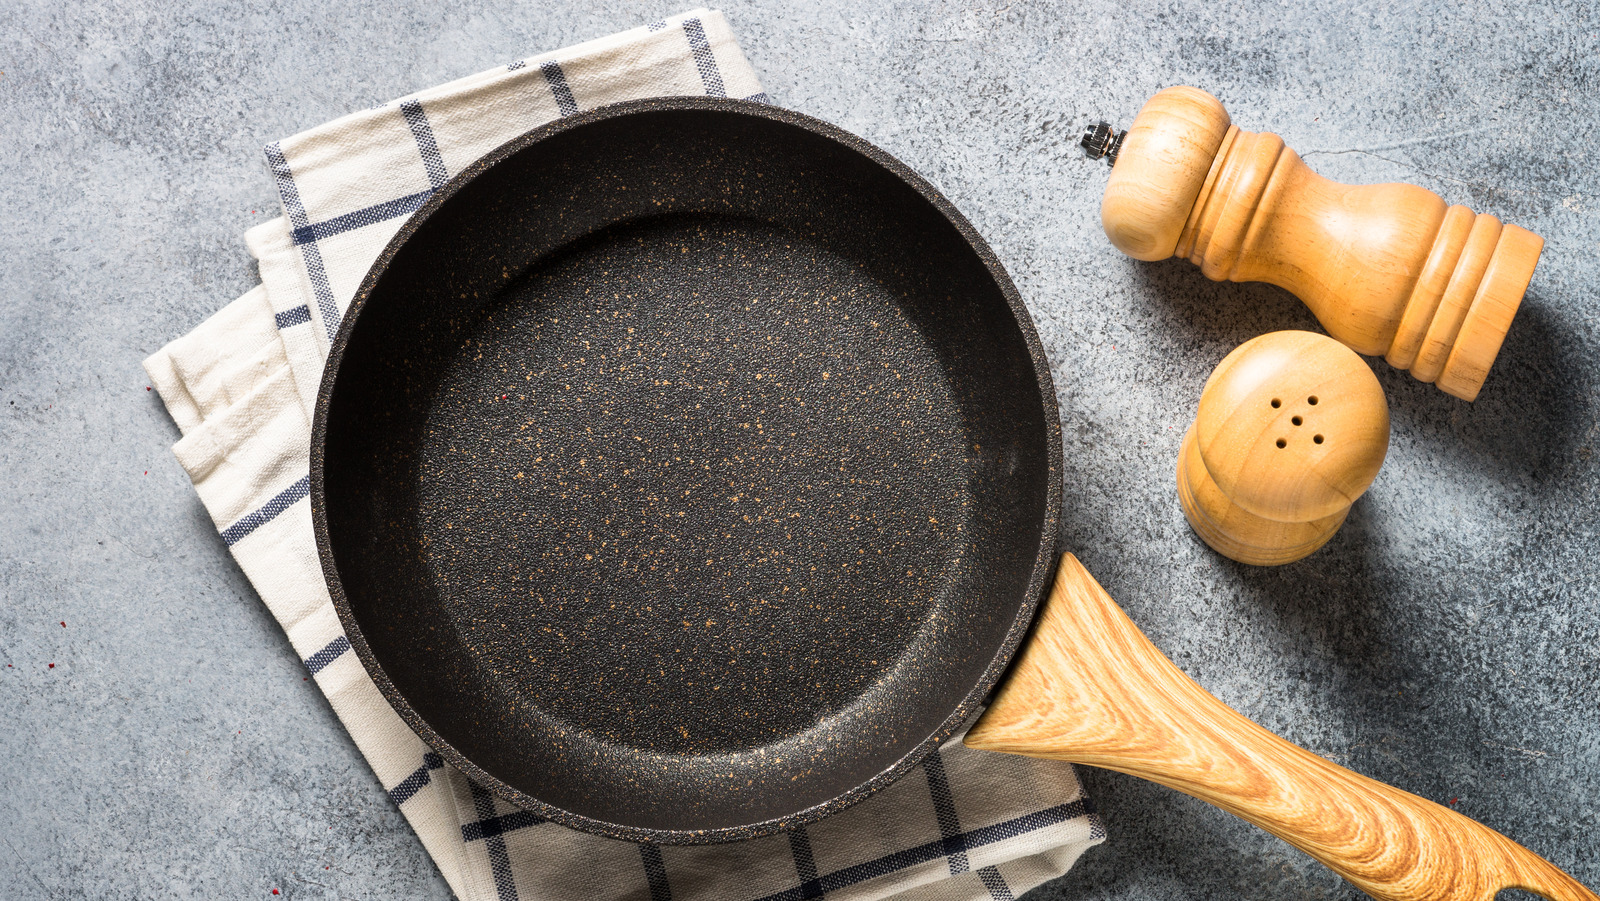 Why Are Cookware Handles Important?